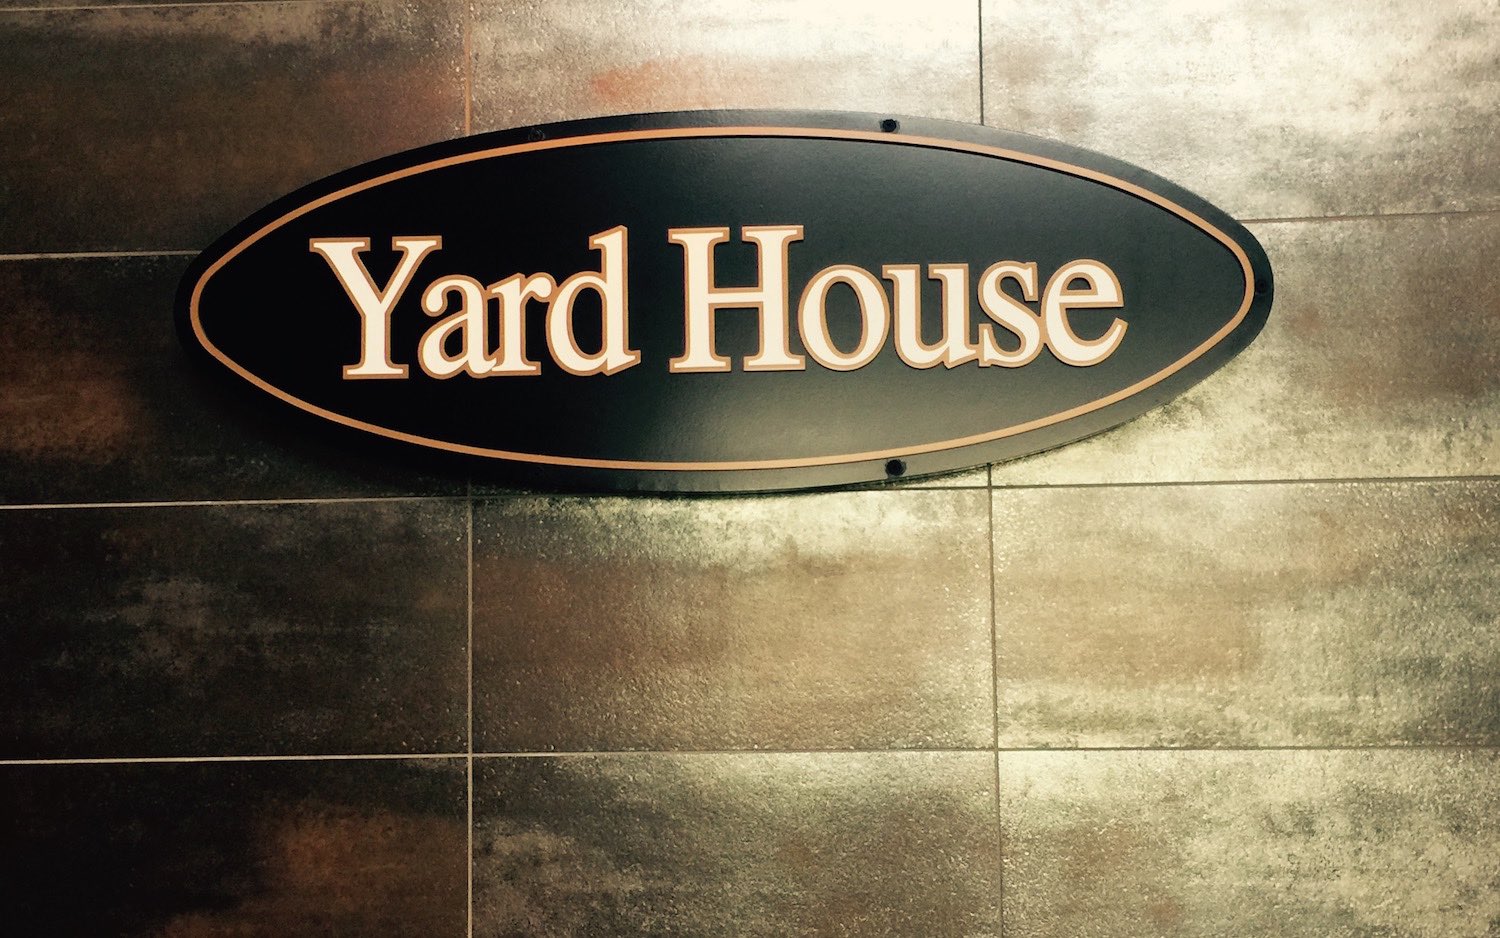 REVIEW: Orlando Yard House | Total Deliciousness